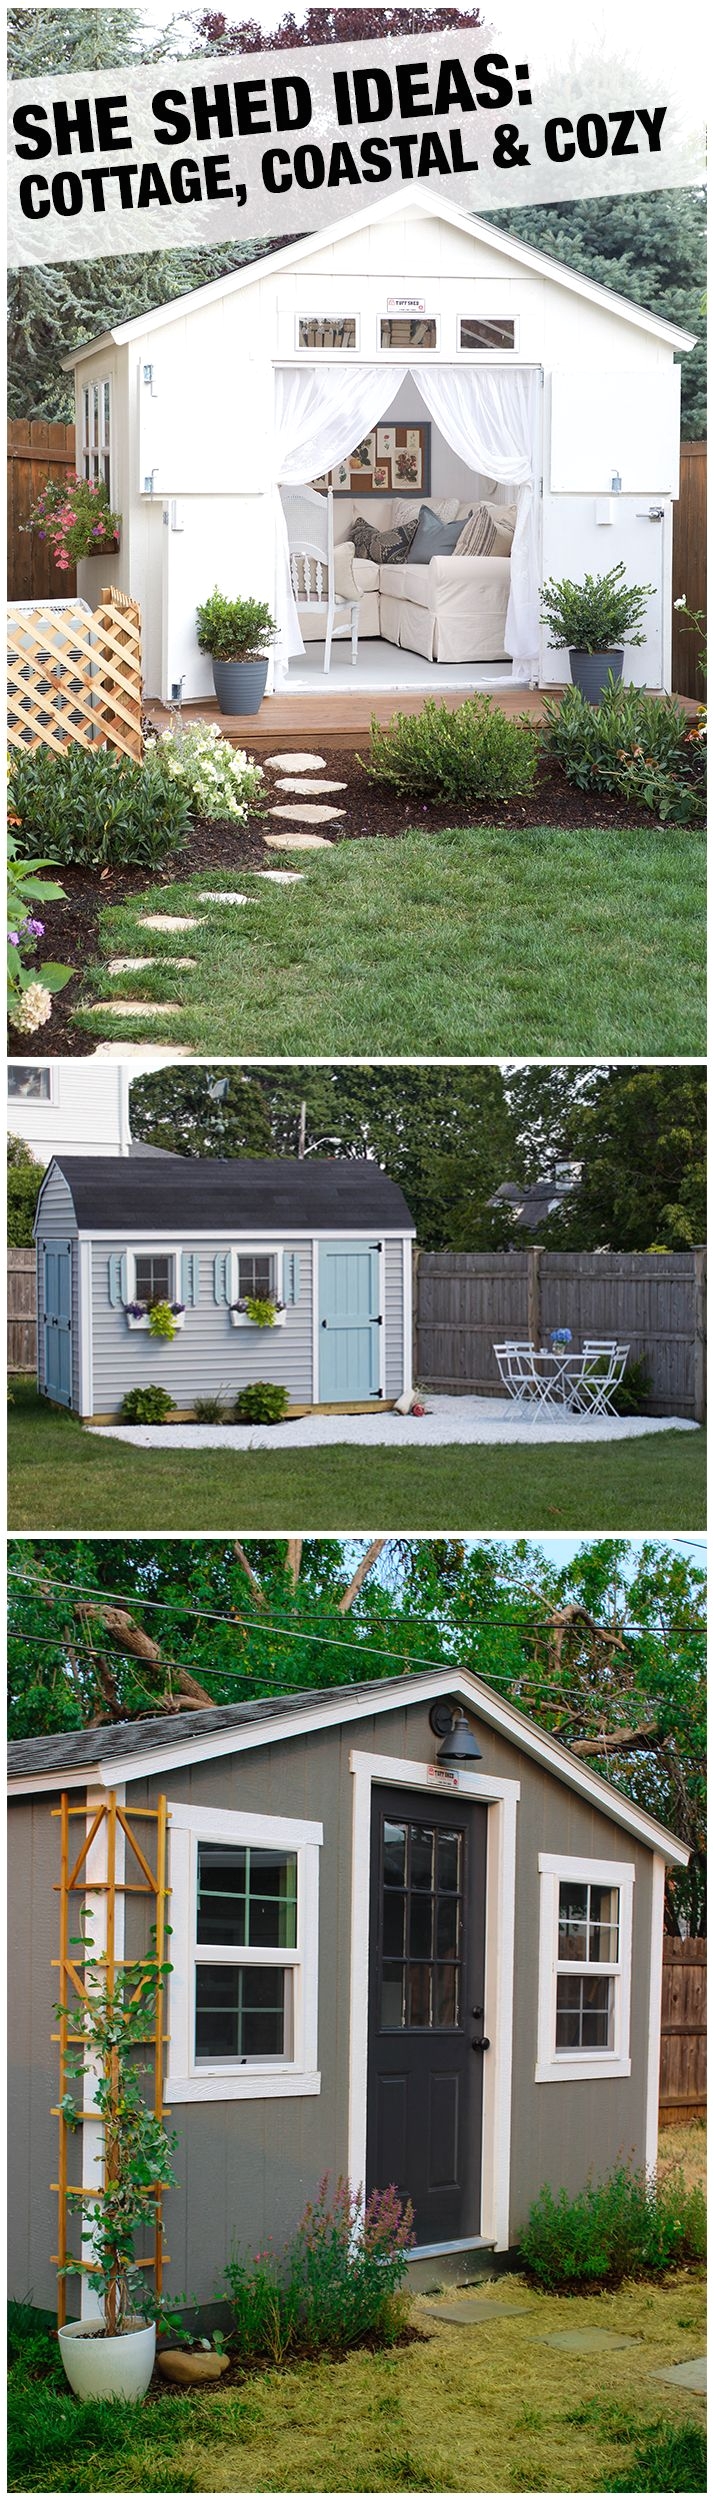 she sheds are one of the best backyard trends ever all it takes is a storage shed and some clever decorating ideas to create your own backyard retreat